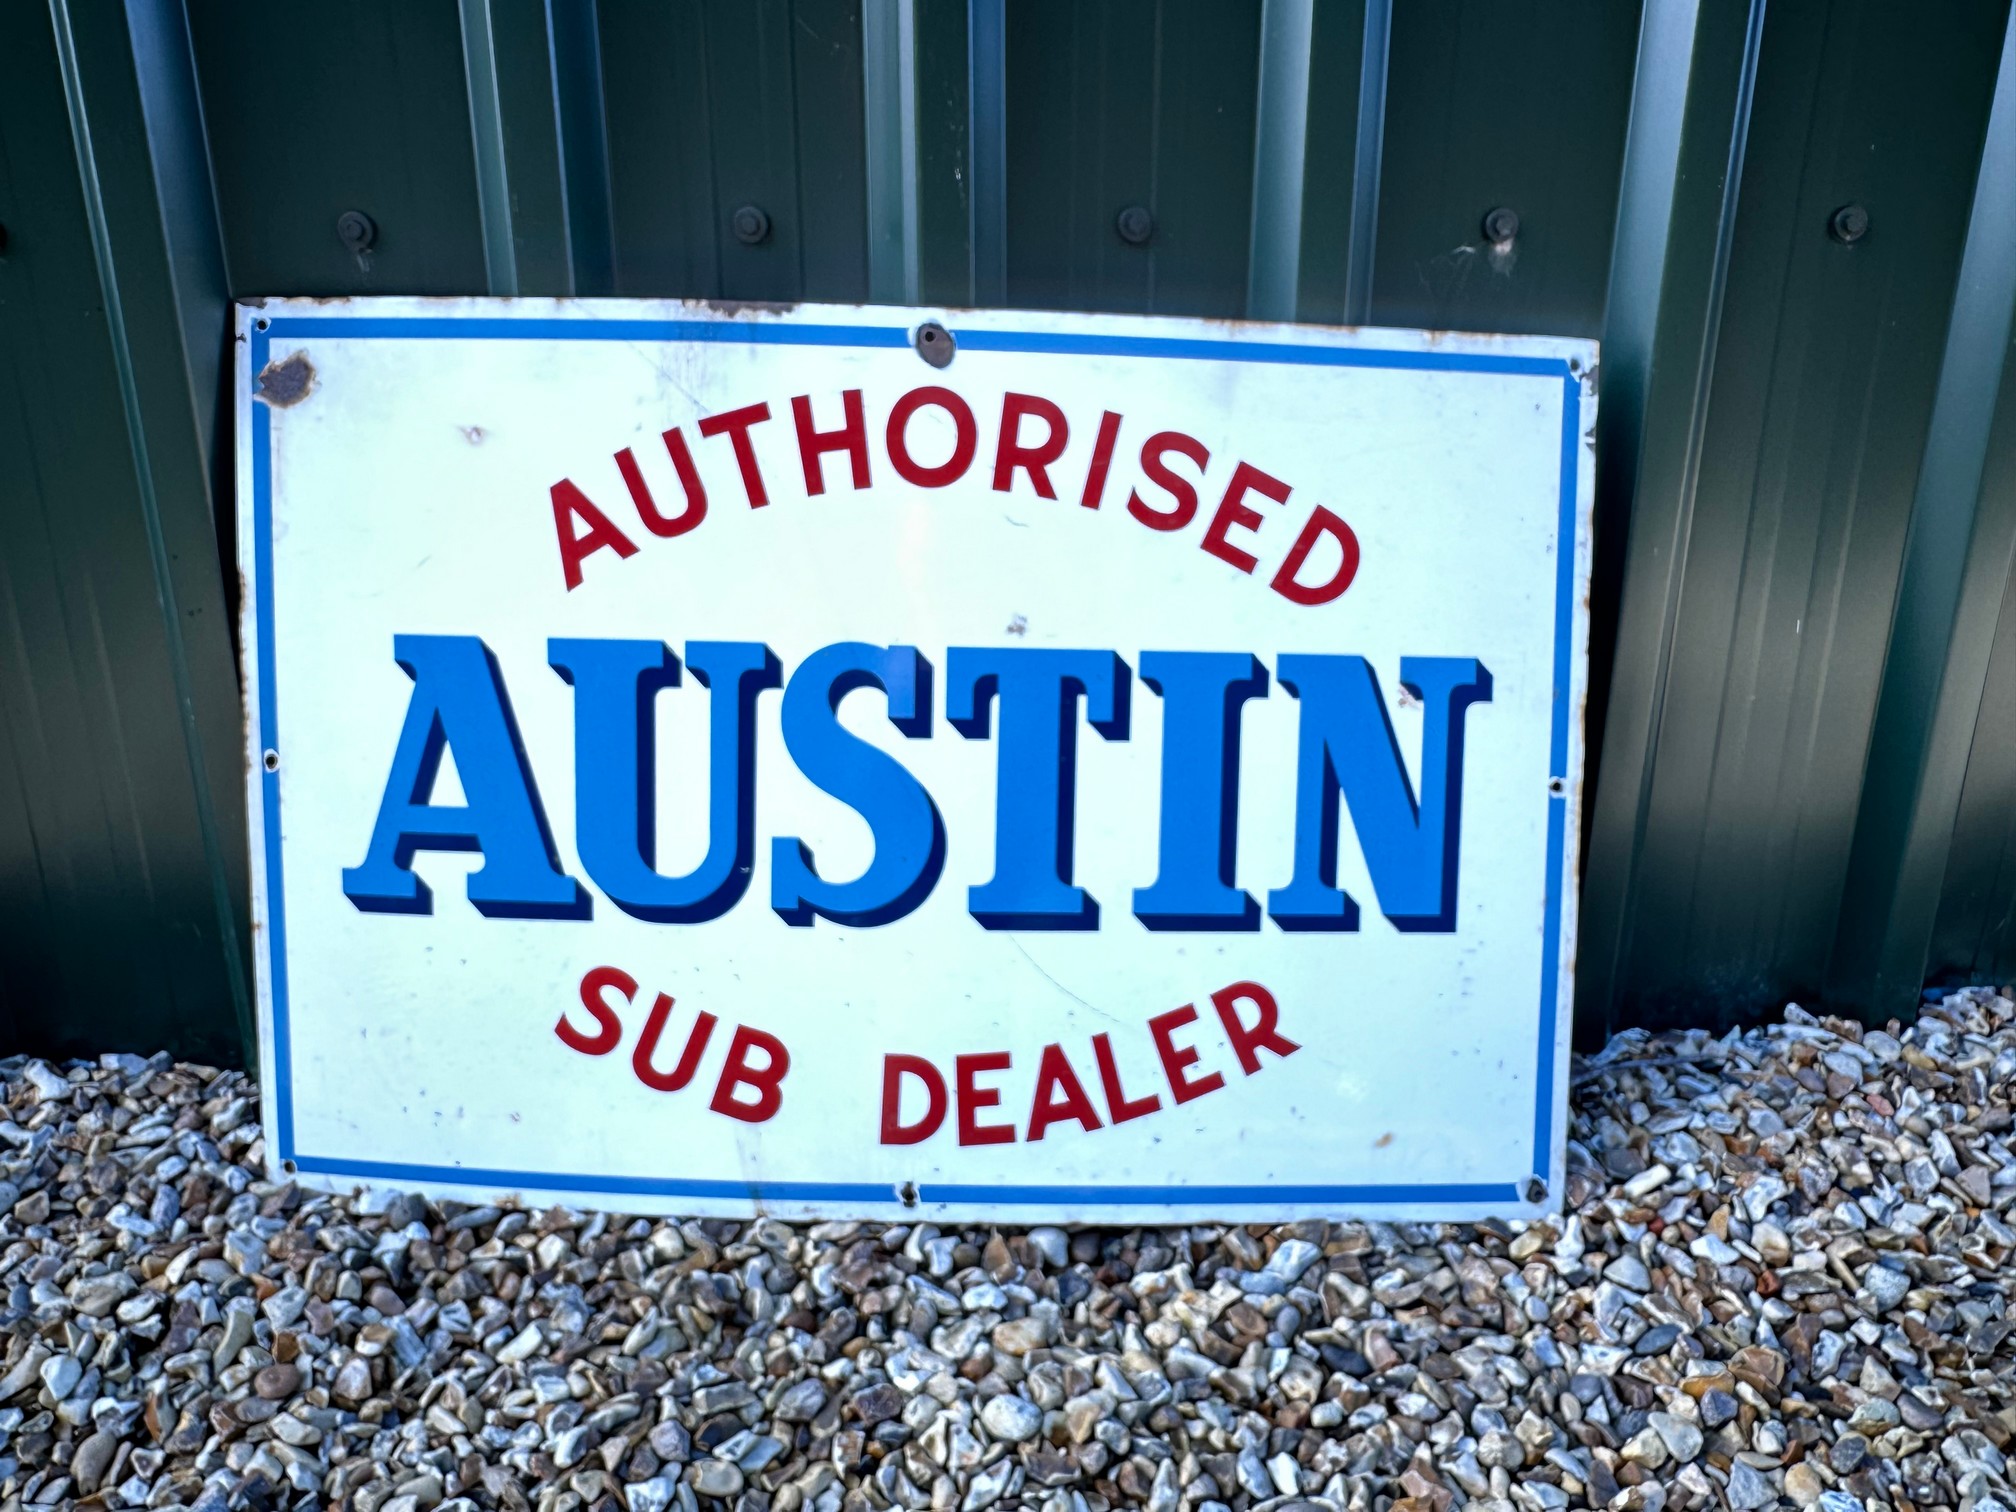 A Continental sign for Austin 'Authorised Sub Dealer', 36 x 24".